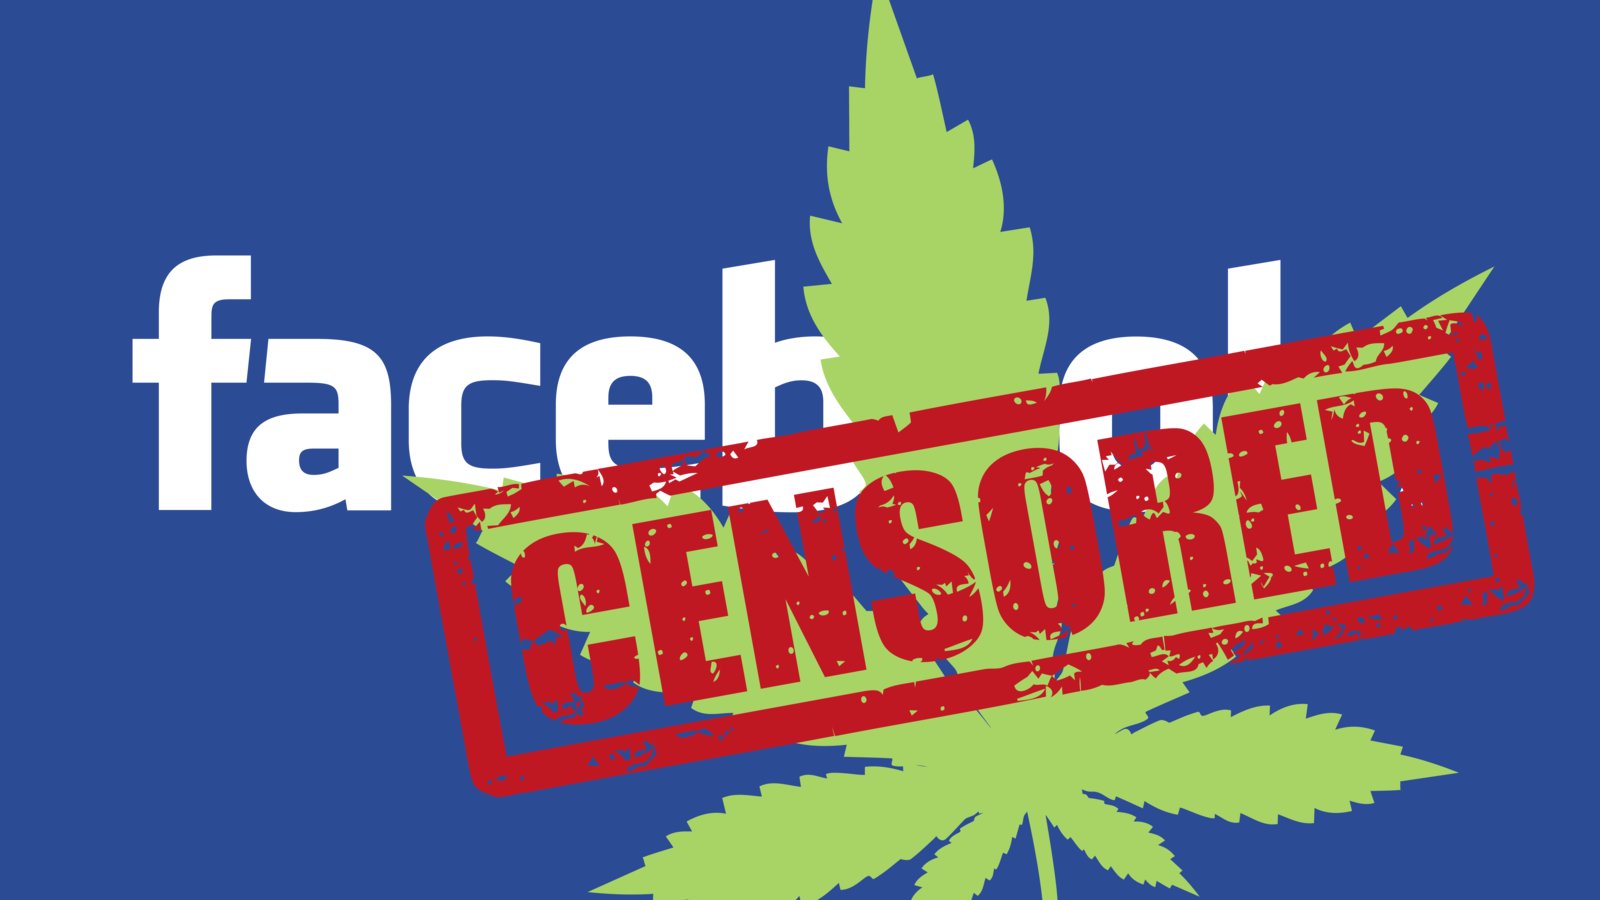 Sign the Petition to end Facebook Censorship of Cannabis Speech